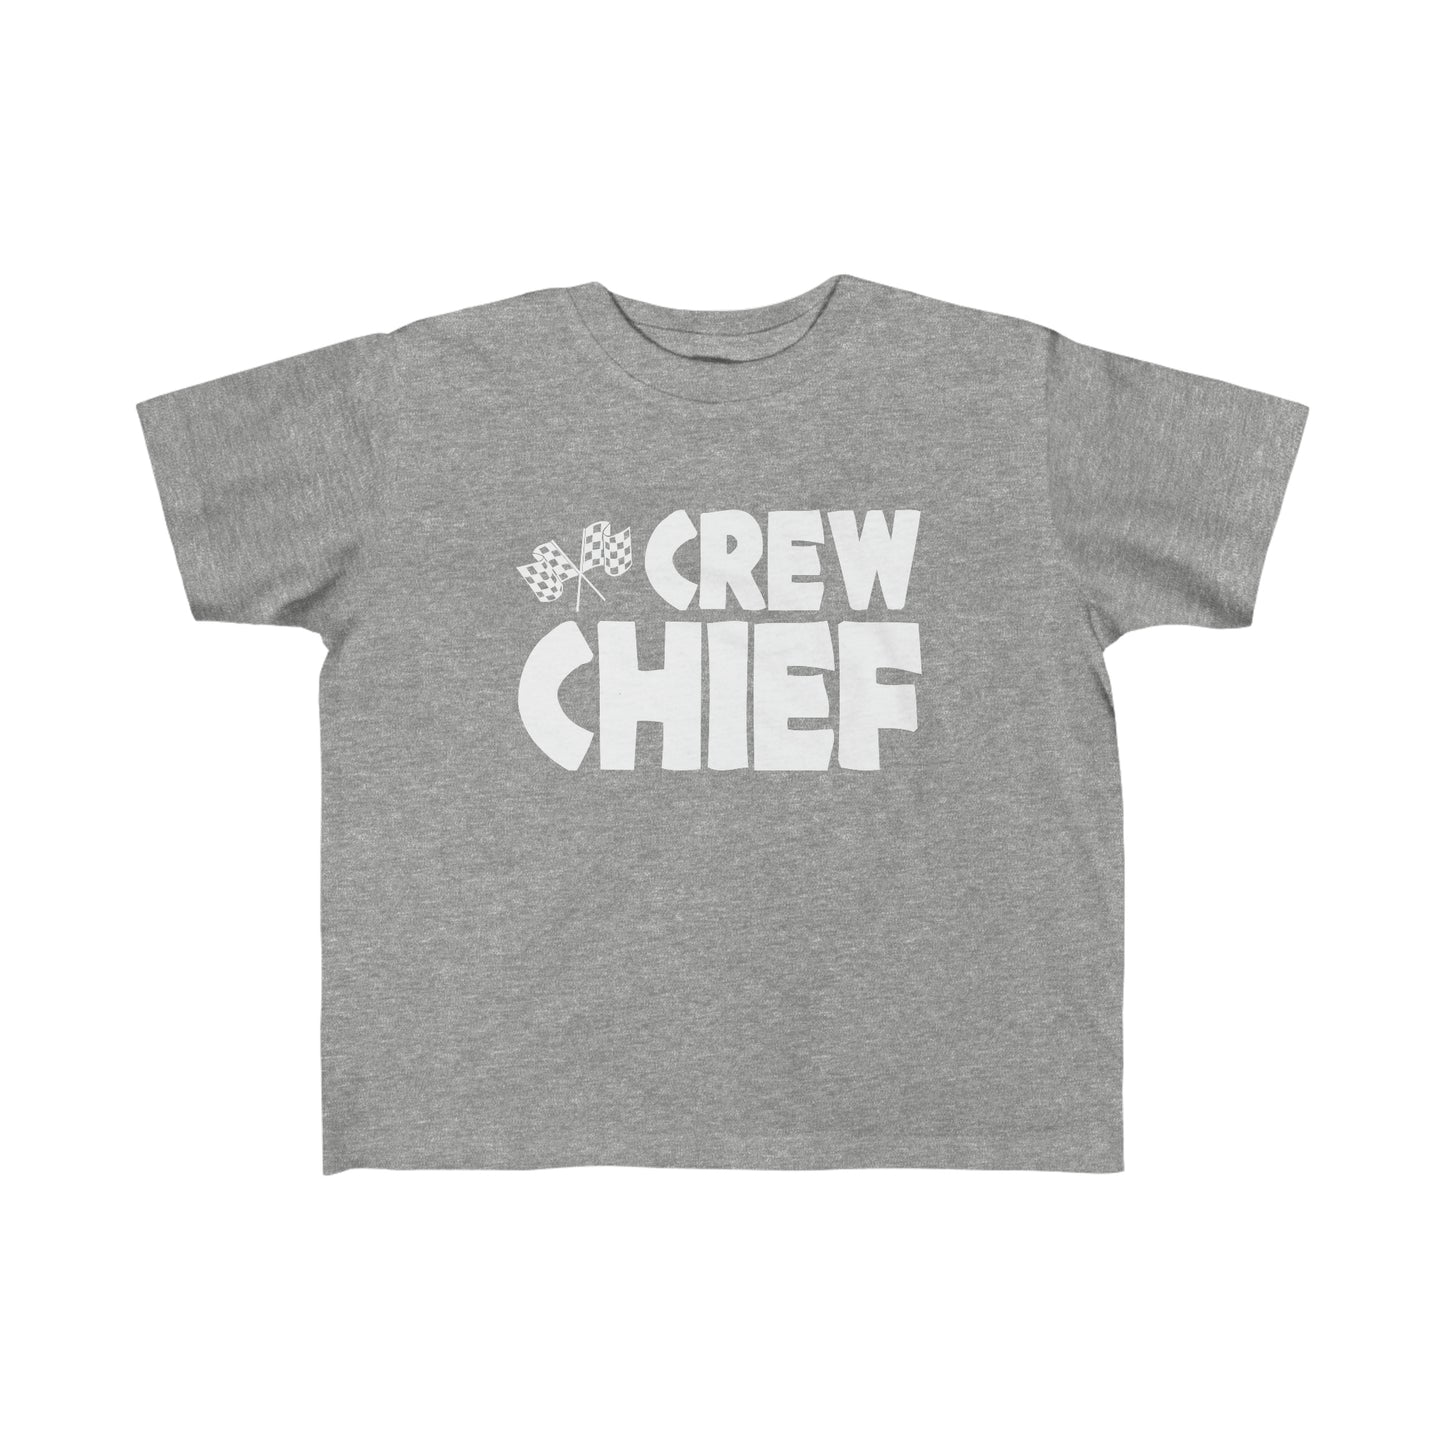 Crew Chief Checker Flag Toddler's Fine Jersey Tee